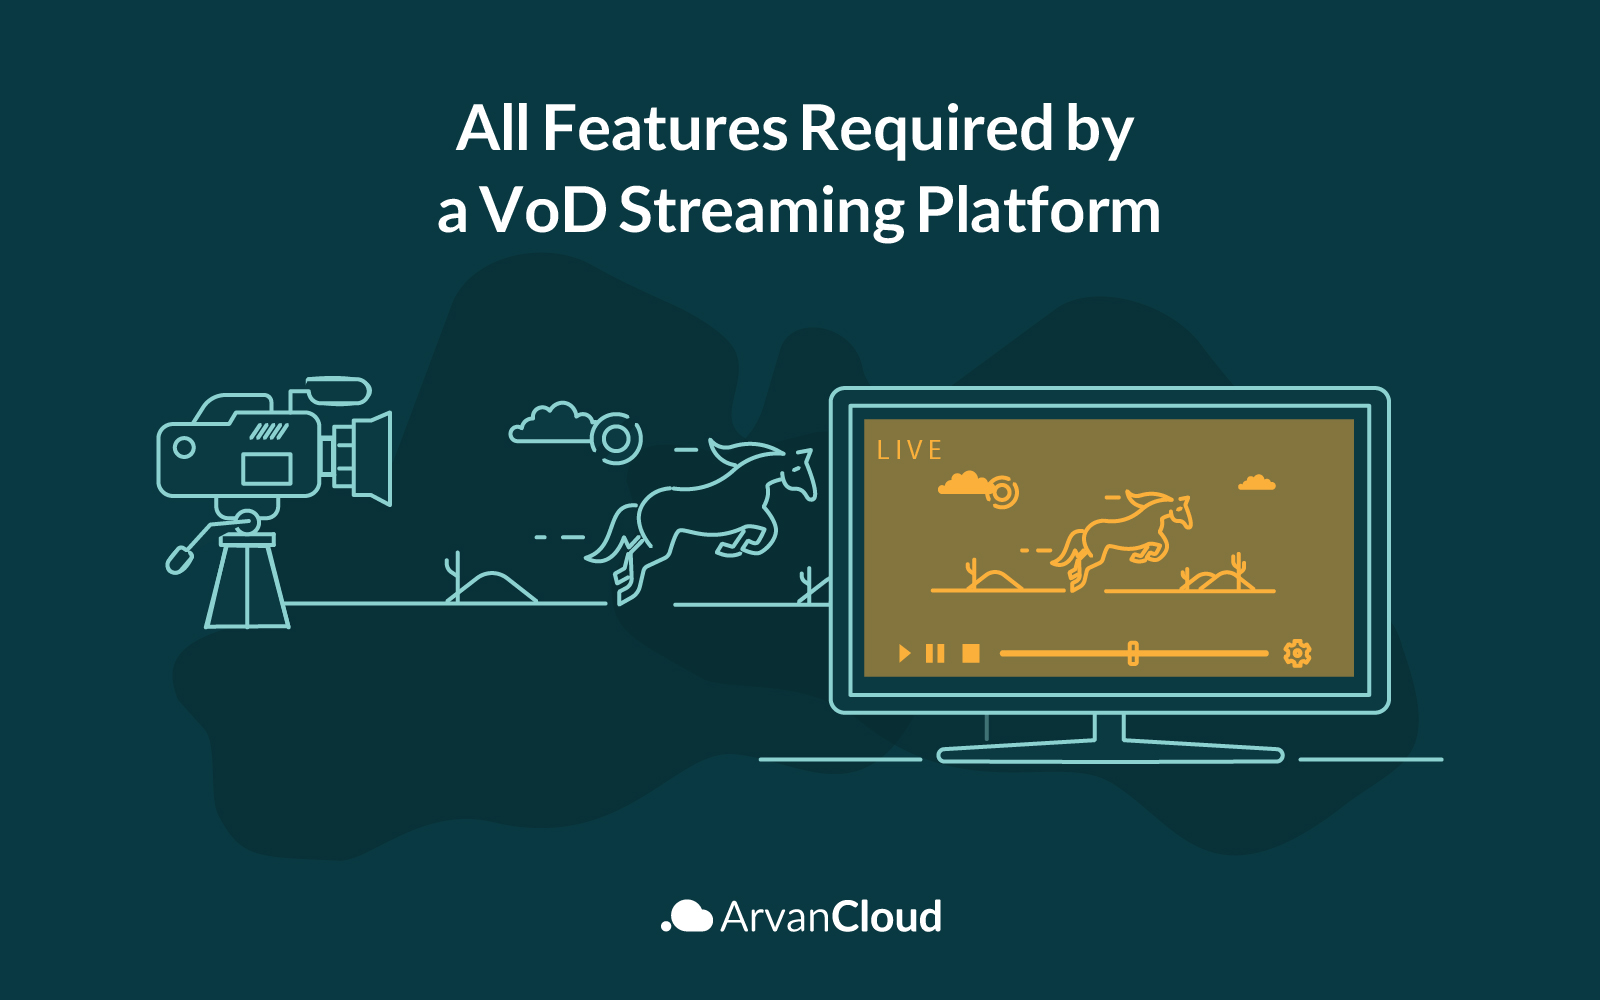 All the Features Required by a VoD Streaming Platform